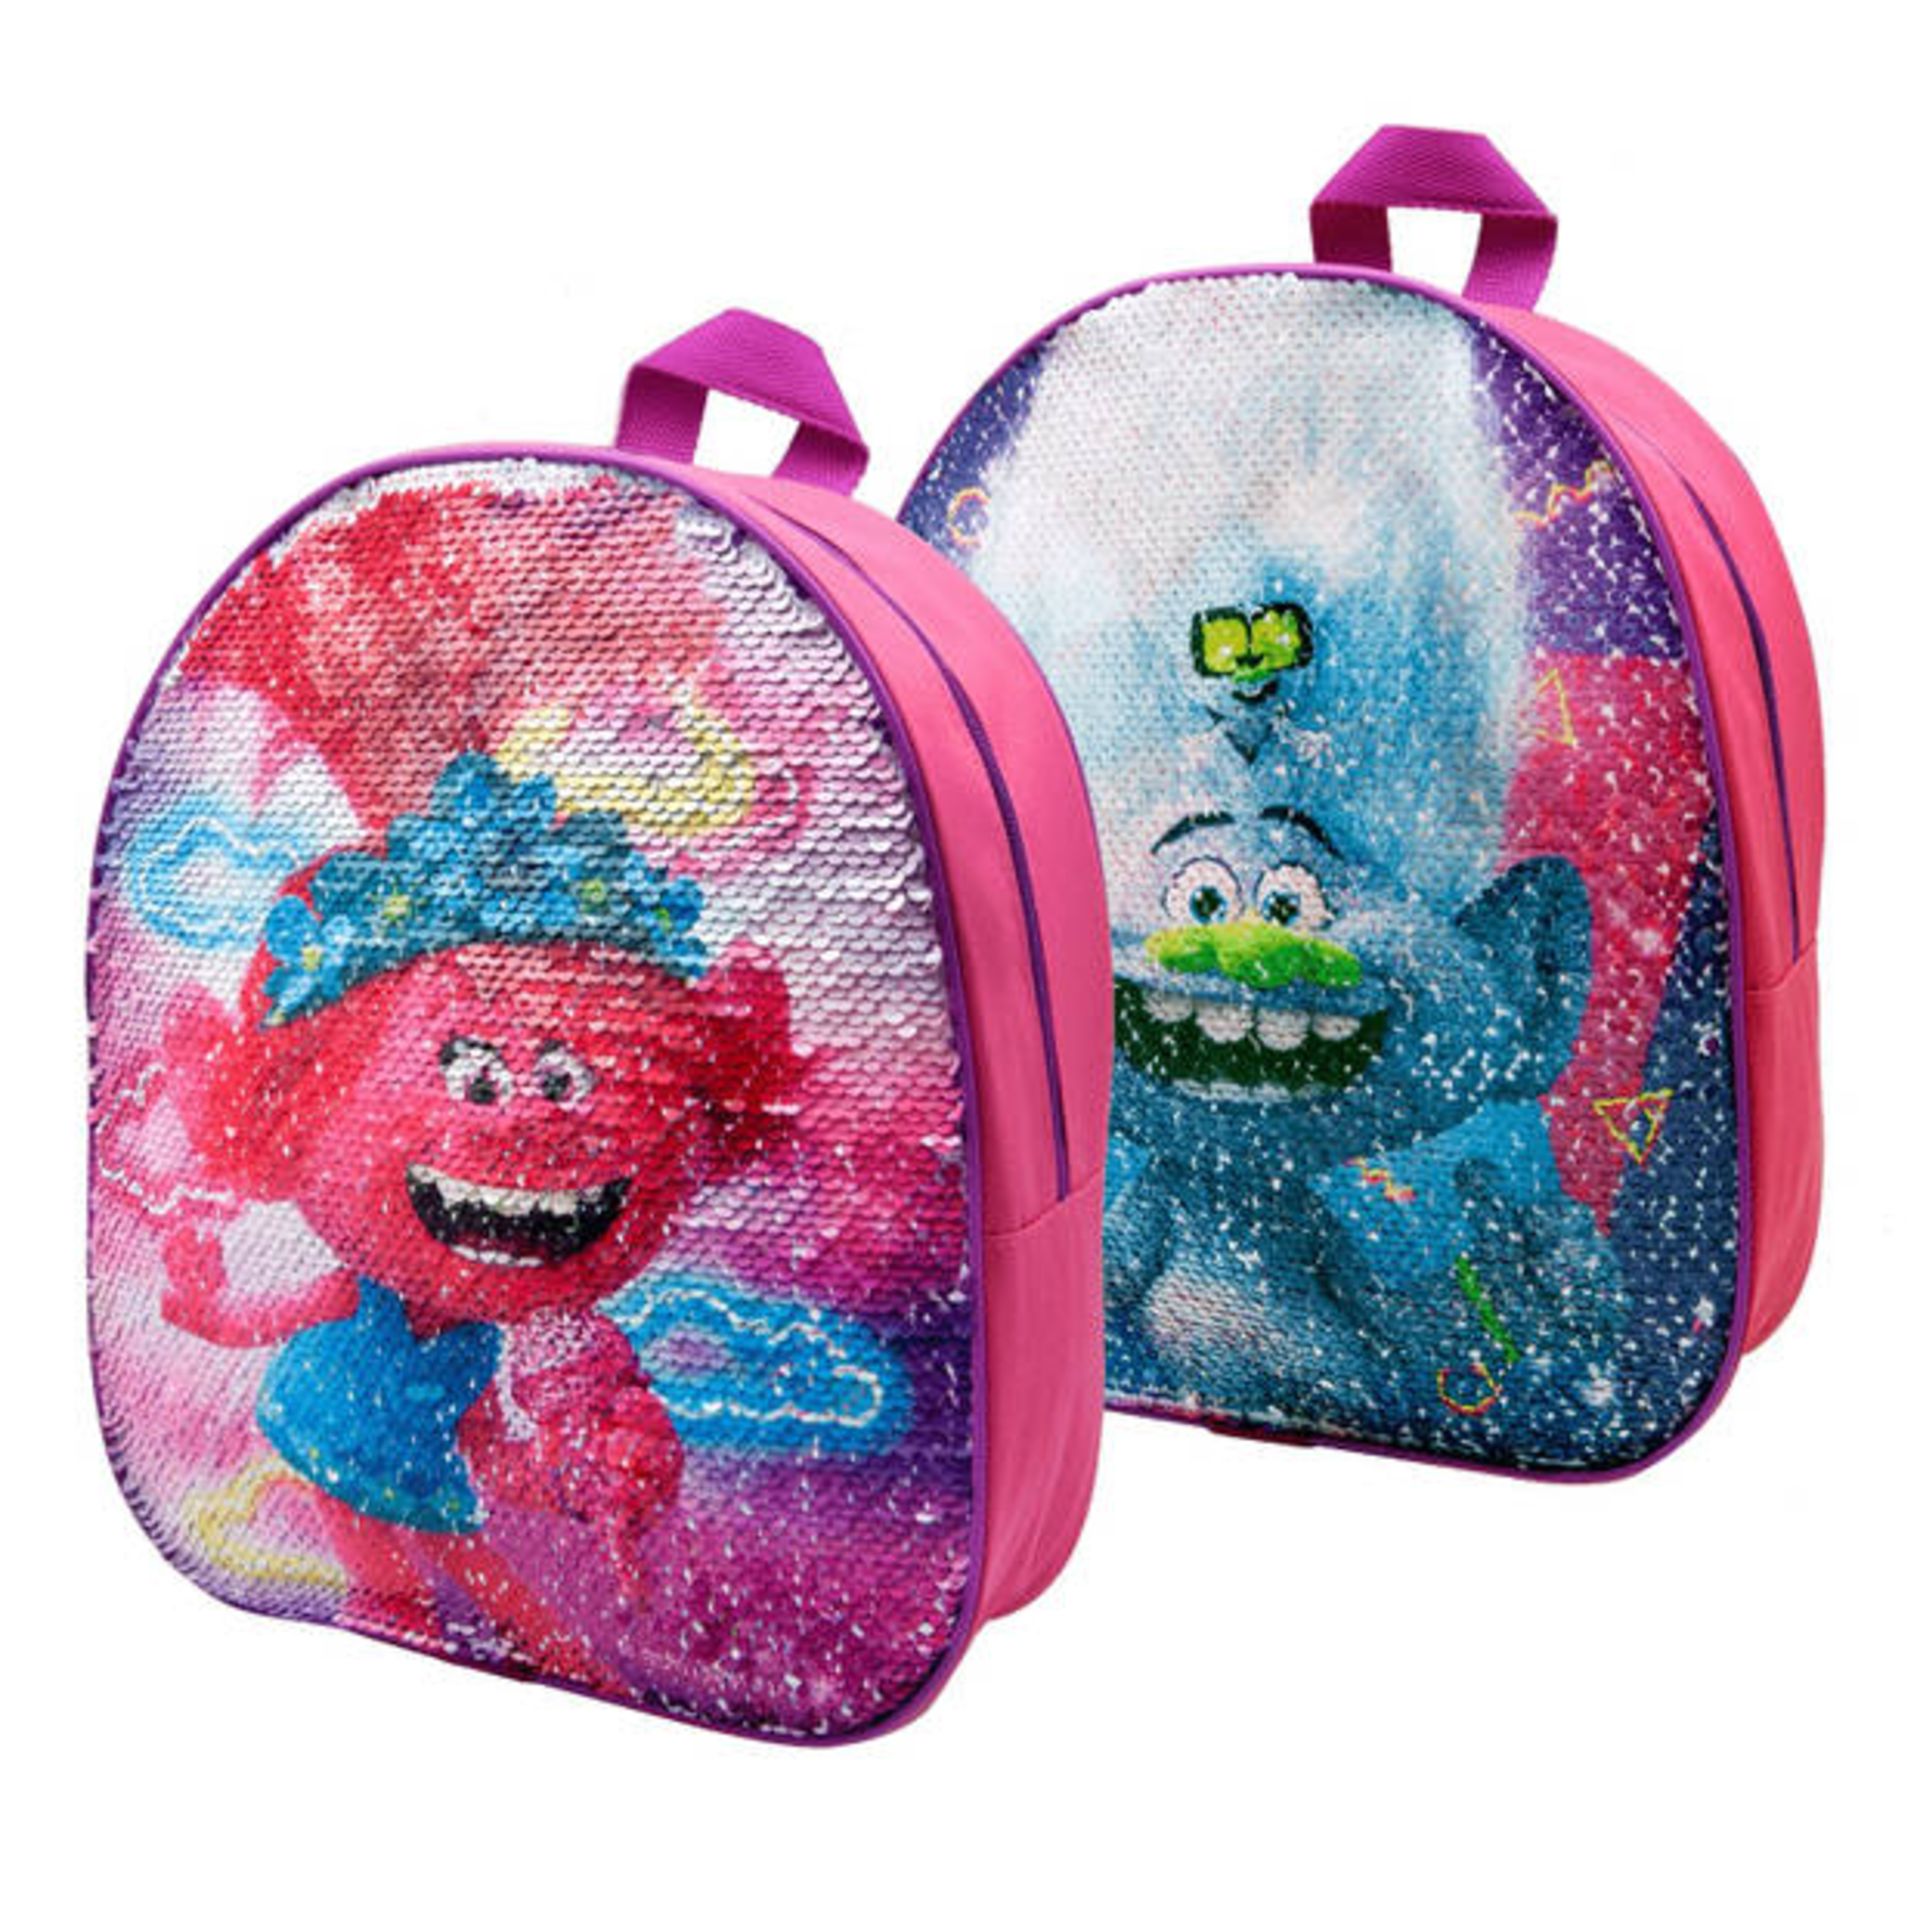 1000 UNITS - TROLLS REVERSIBLE SEQUIN BACKPACK – NEW MOVIE OUT 17TH NOVEMBER!